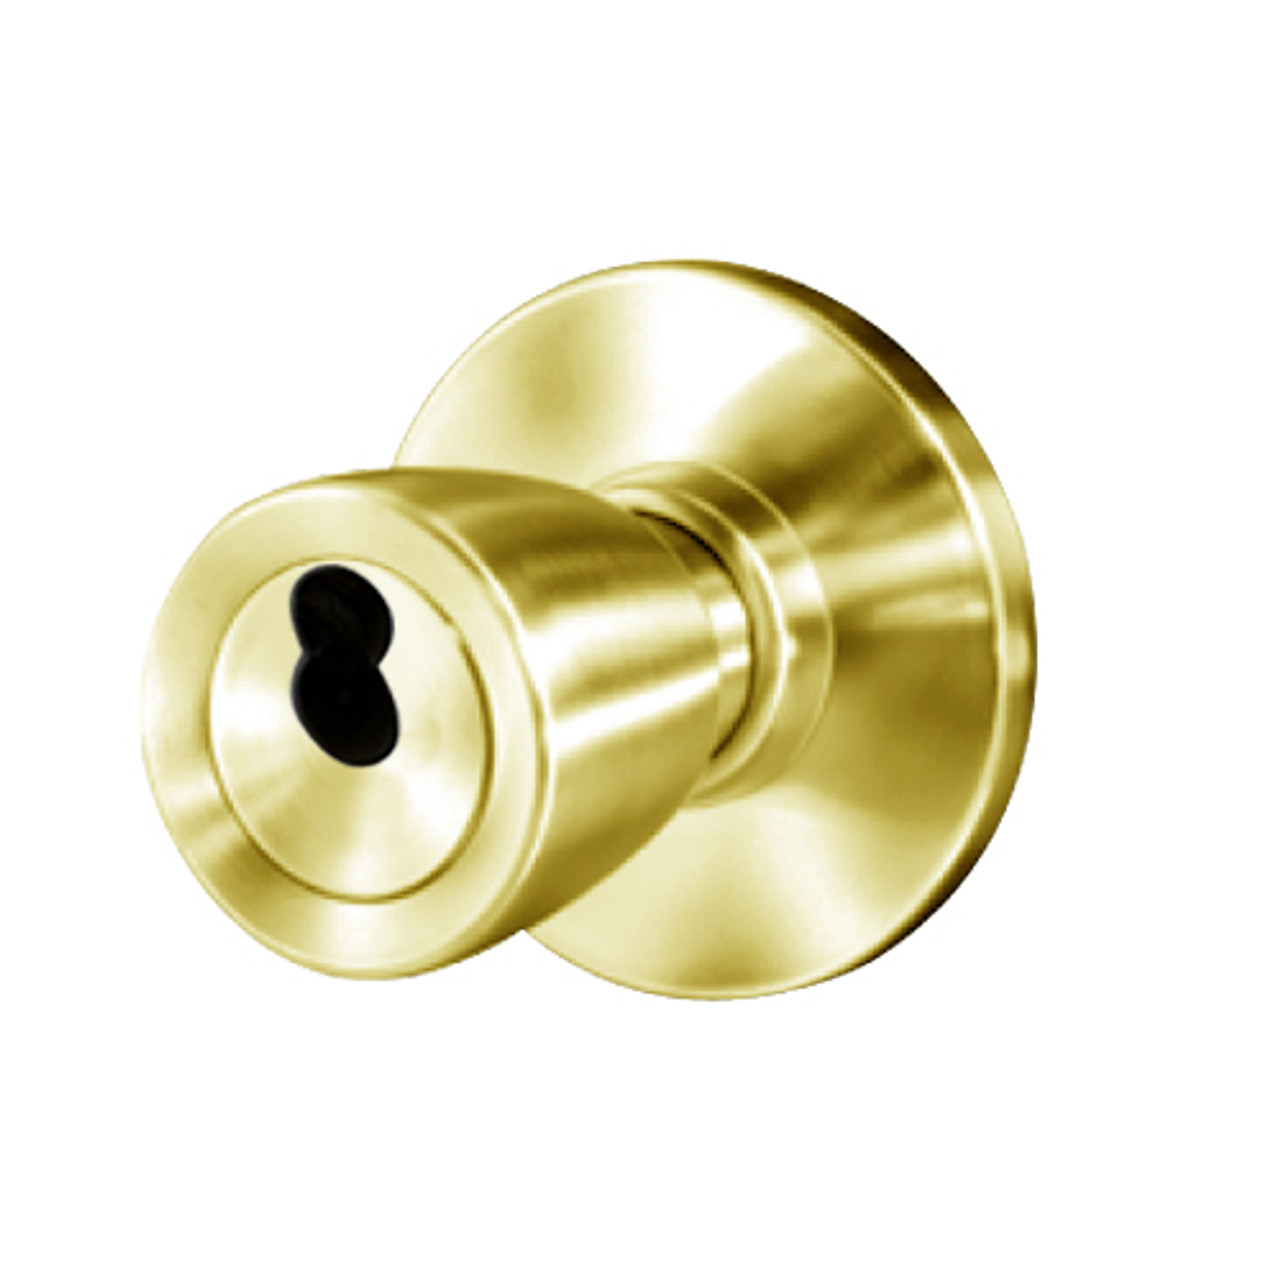 8K37B6AS3605 Best 8K Series Office Heavy Duty Cylindrical Knob Locks with Tulip Style in Bright Brass